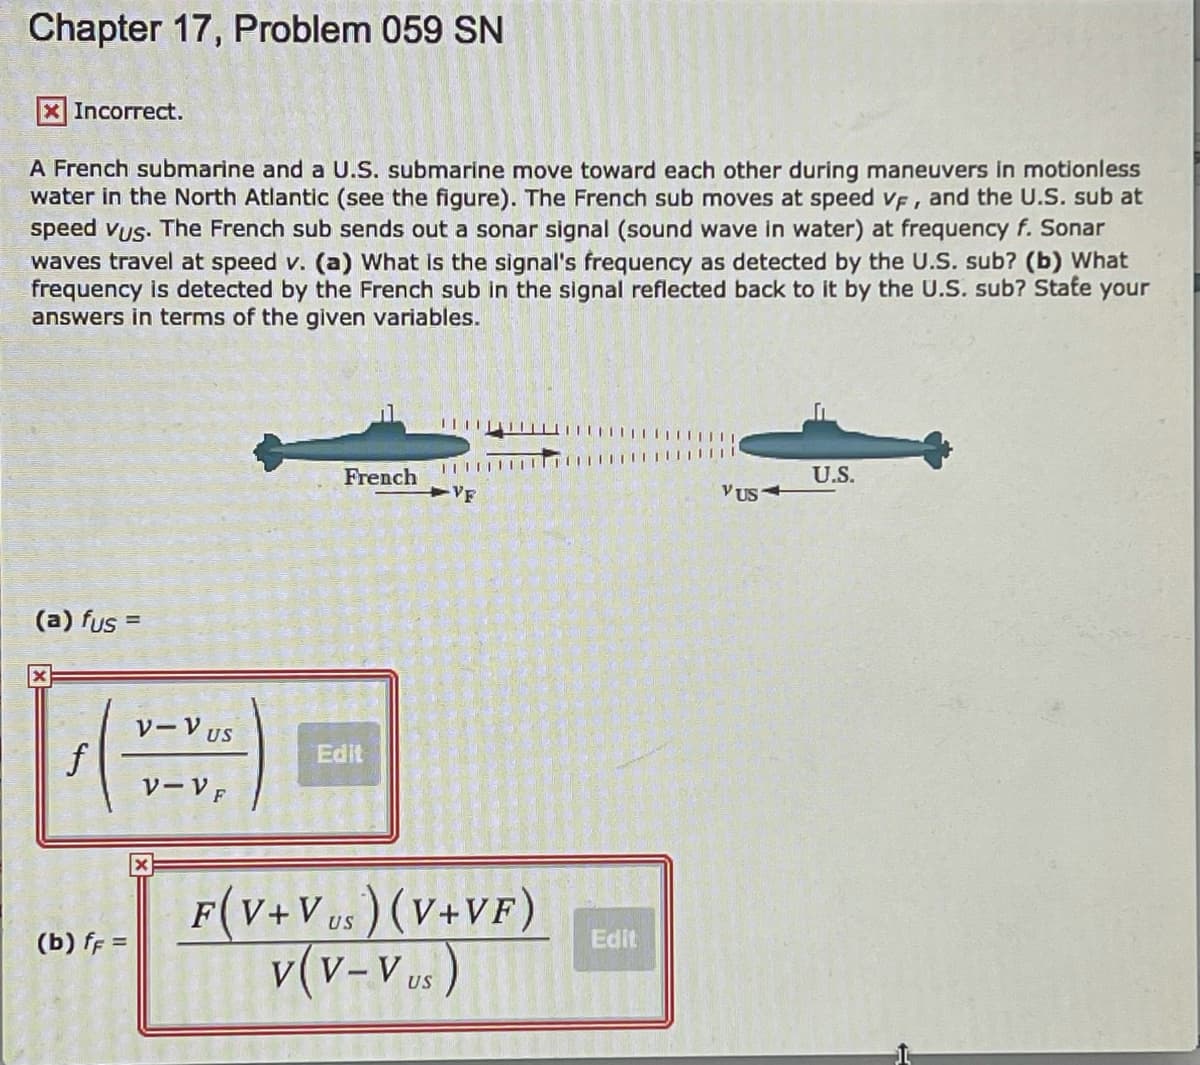 Chapter 17, Problem 059 SN
Incorrect.
A French submarine and a U.S. submarine move toward each other during maneuvers in motionless
water in the North Atlantic (see the figure). The French sub moves at speed vF, and the U.S. sub at
speed vus. The French sub sends out a sonar signal (sound wave in water) at frequency f. Sonar
waves travel at speed v. (a) What is the signal's frequency as detected by the U.S. sub? (b) What
frequency is detected by the French sub in the signal reflected back to it by the U.S. sub? State your
answers in terms of the given variables.
I| |
French
U.S.
VF
V US
(a) fus =
%3D
VーVUS
Edit
VーVF
F(V+Vus ) (V+VF)
v(v-Vus)
US
(b) ff =
Edit
US
